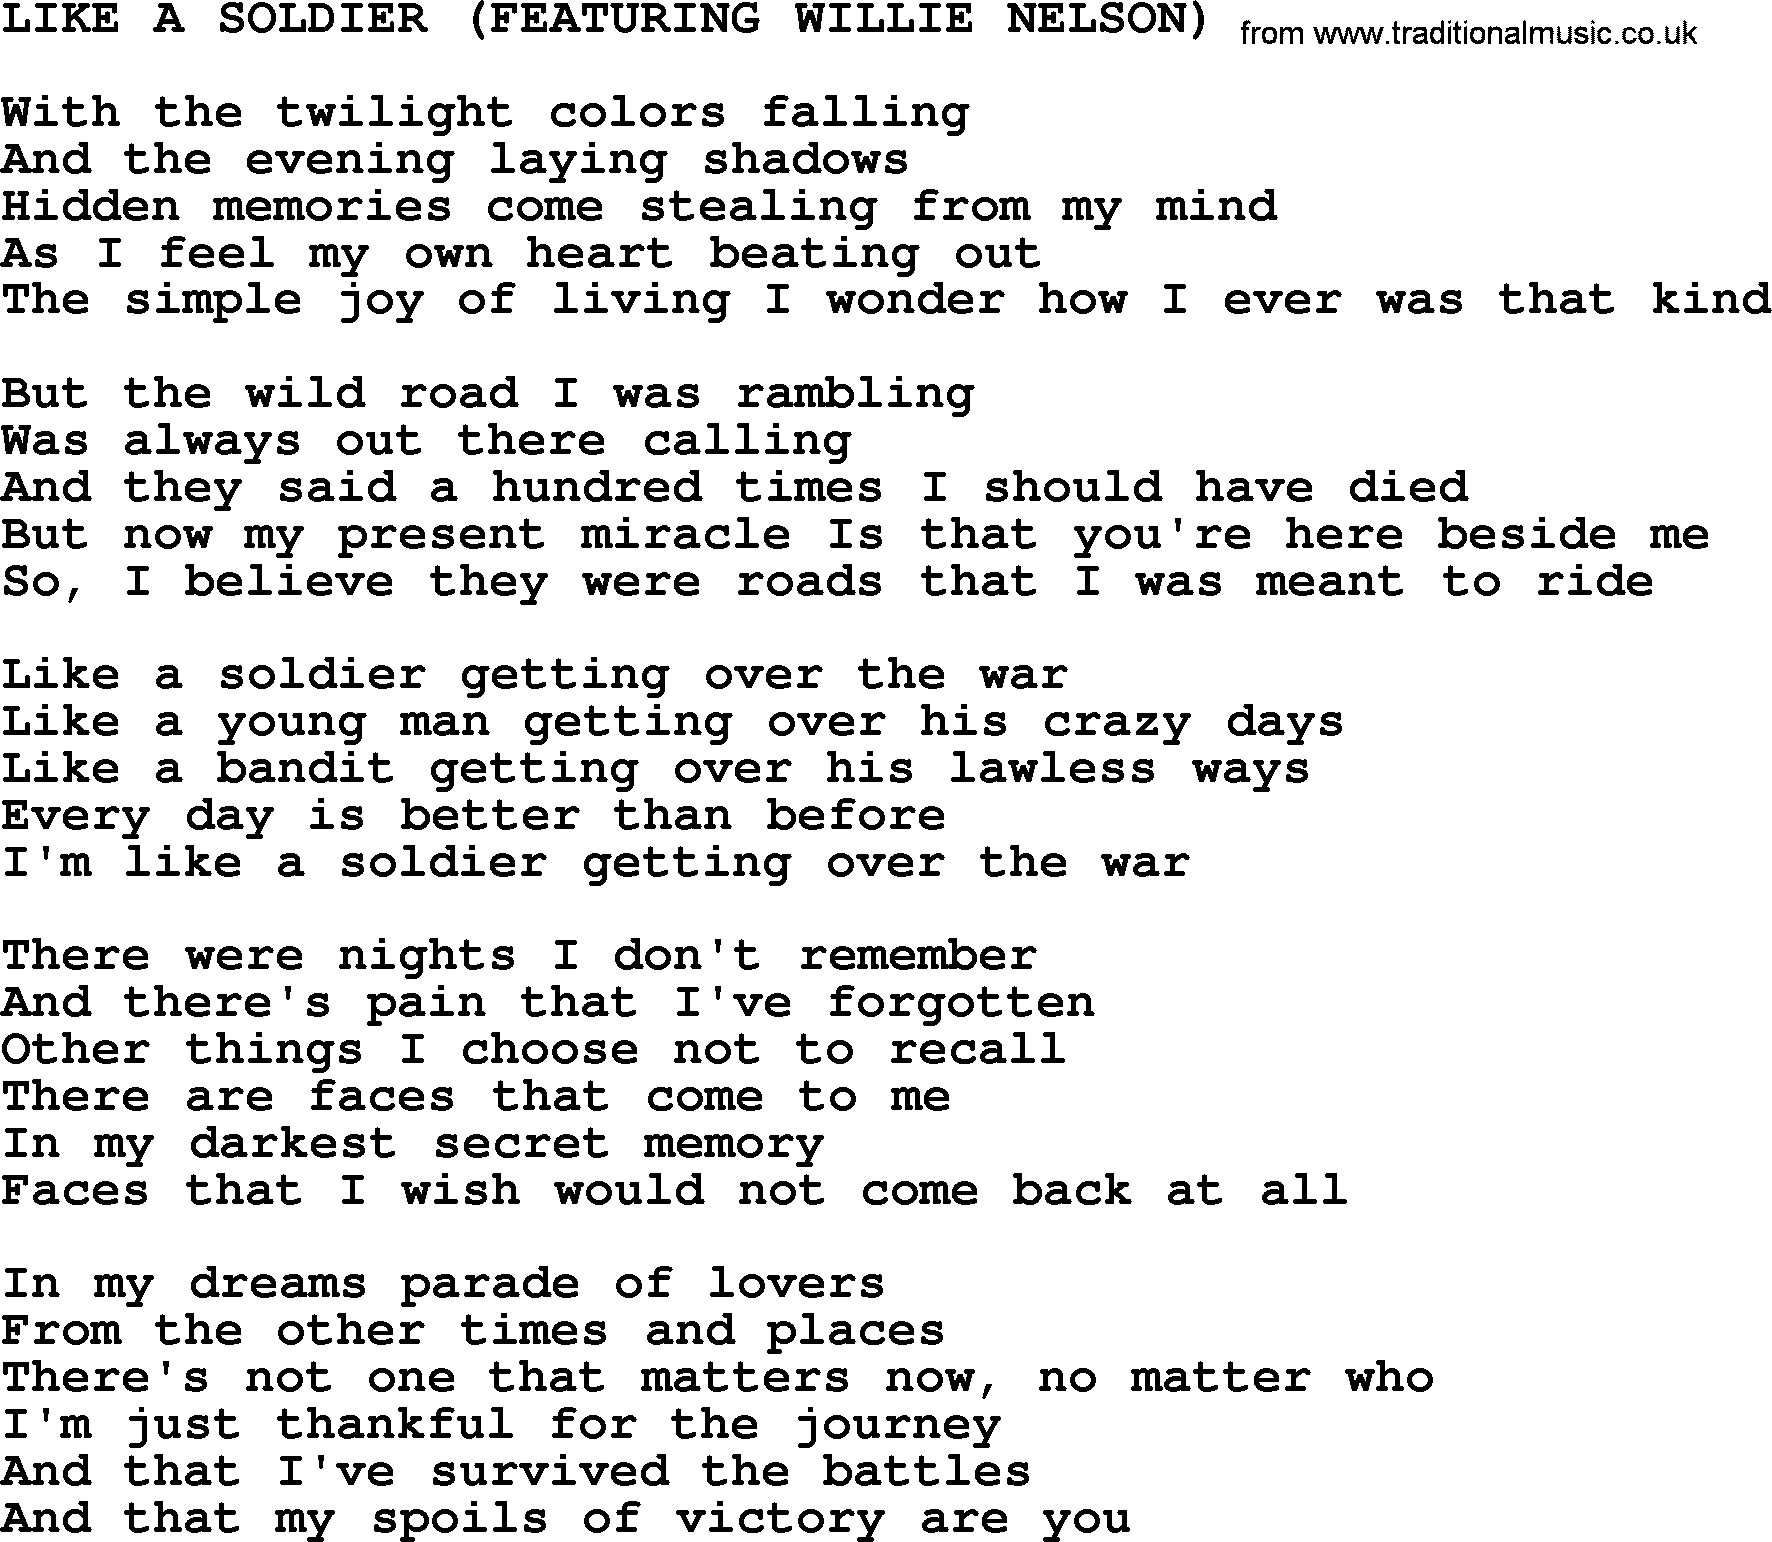 Johnny Cash song Like A Soldier (Featuring Willie Nelson).txt lyrics